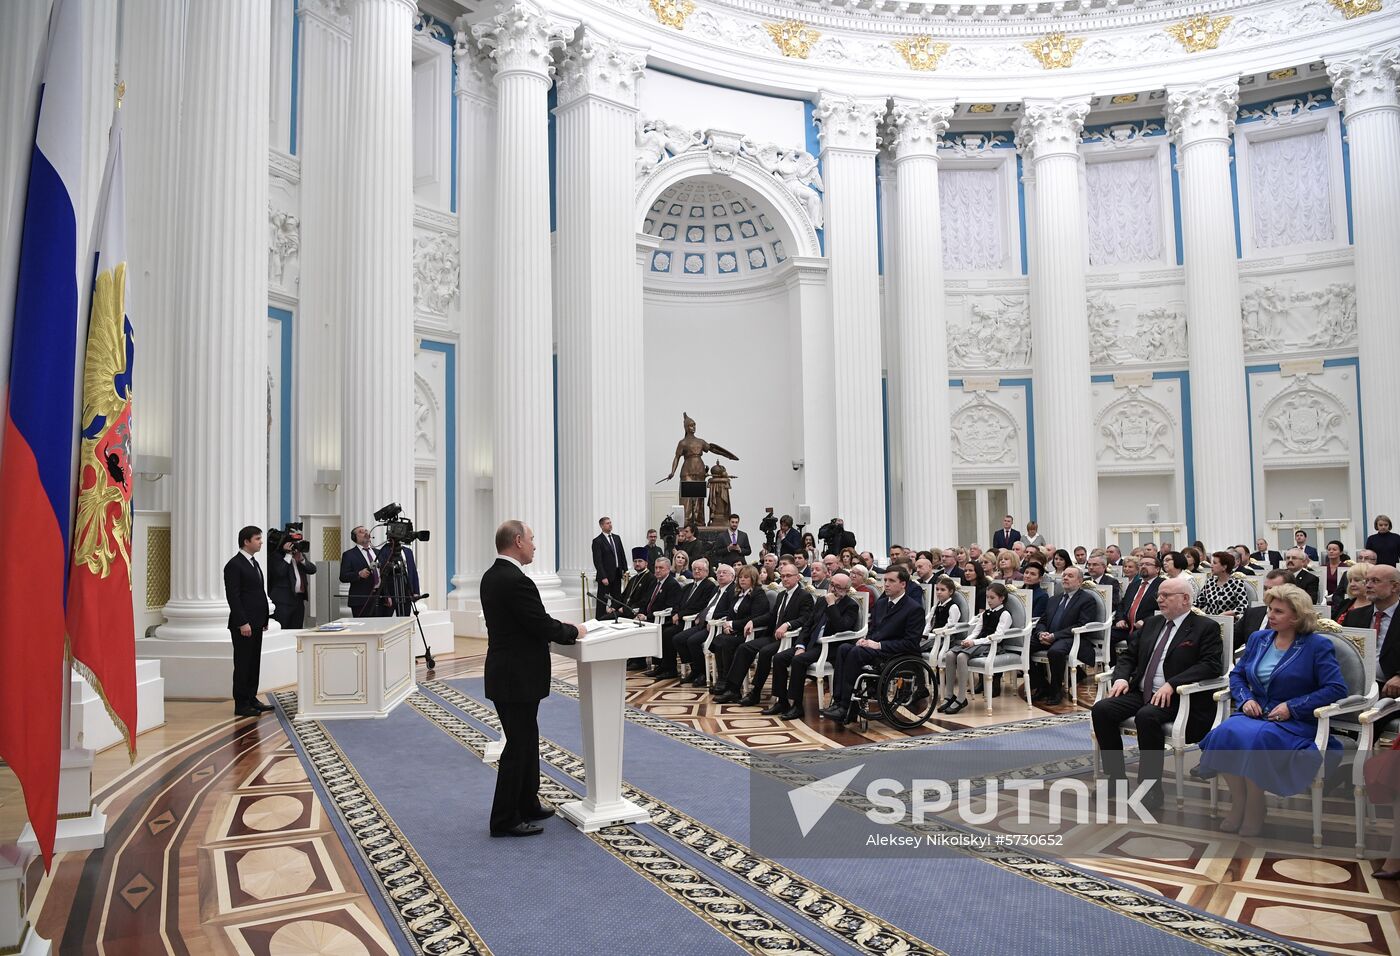 President Vladimir Putin presents national awards for outstanding achievements in human rights and charity work